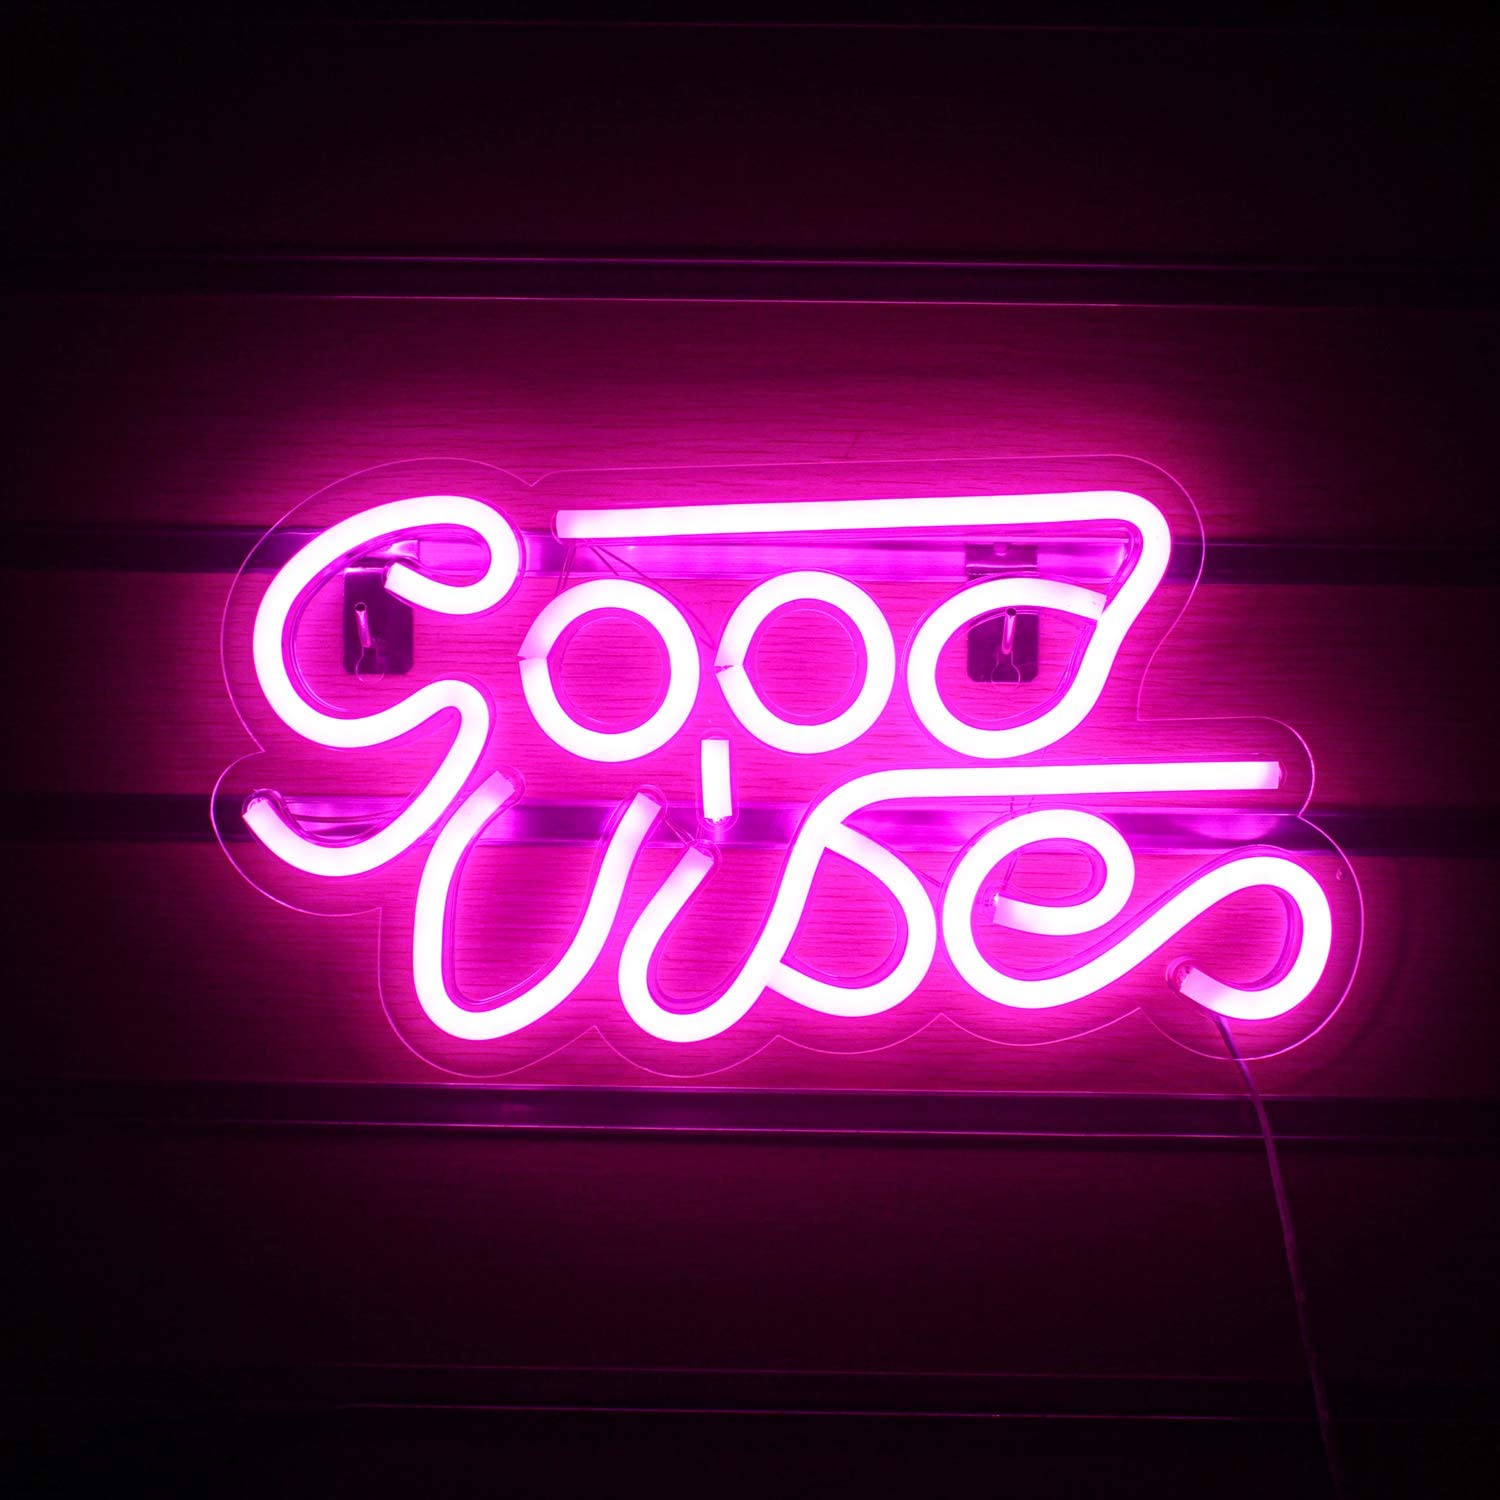 Good Vibes Neon Sign Lights Signs Lights with USB Decor for Room Bedroom Bar Restaurant Game Room Christmas Valentine's Day Birthday Party LED Art Decoration Light (Pink)